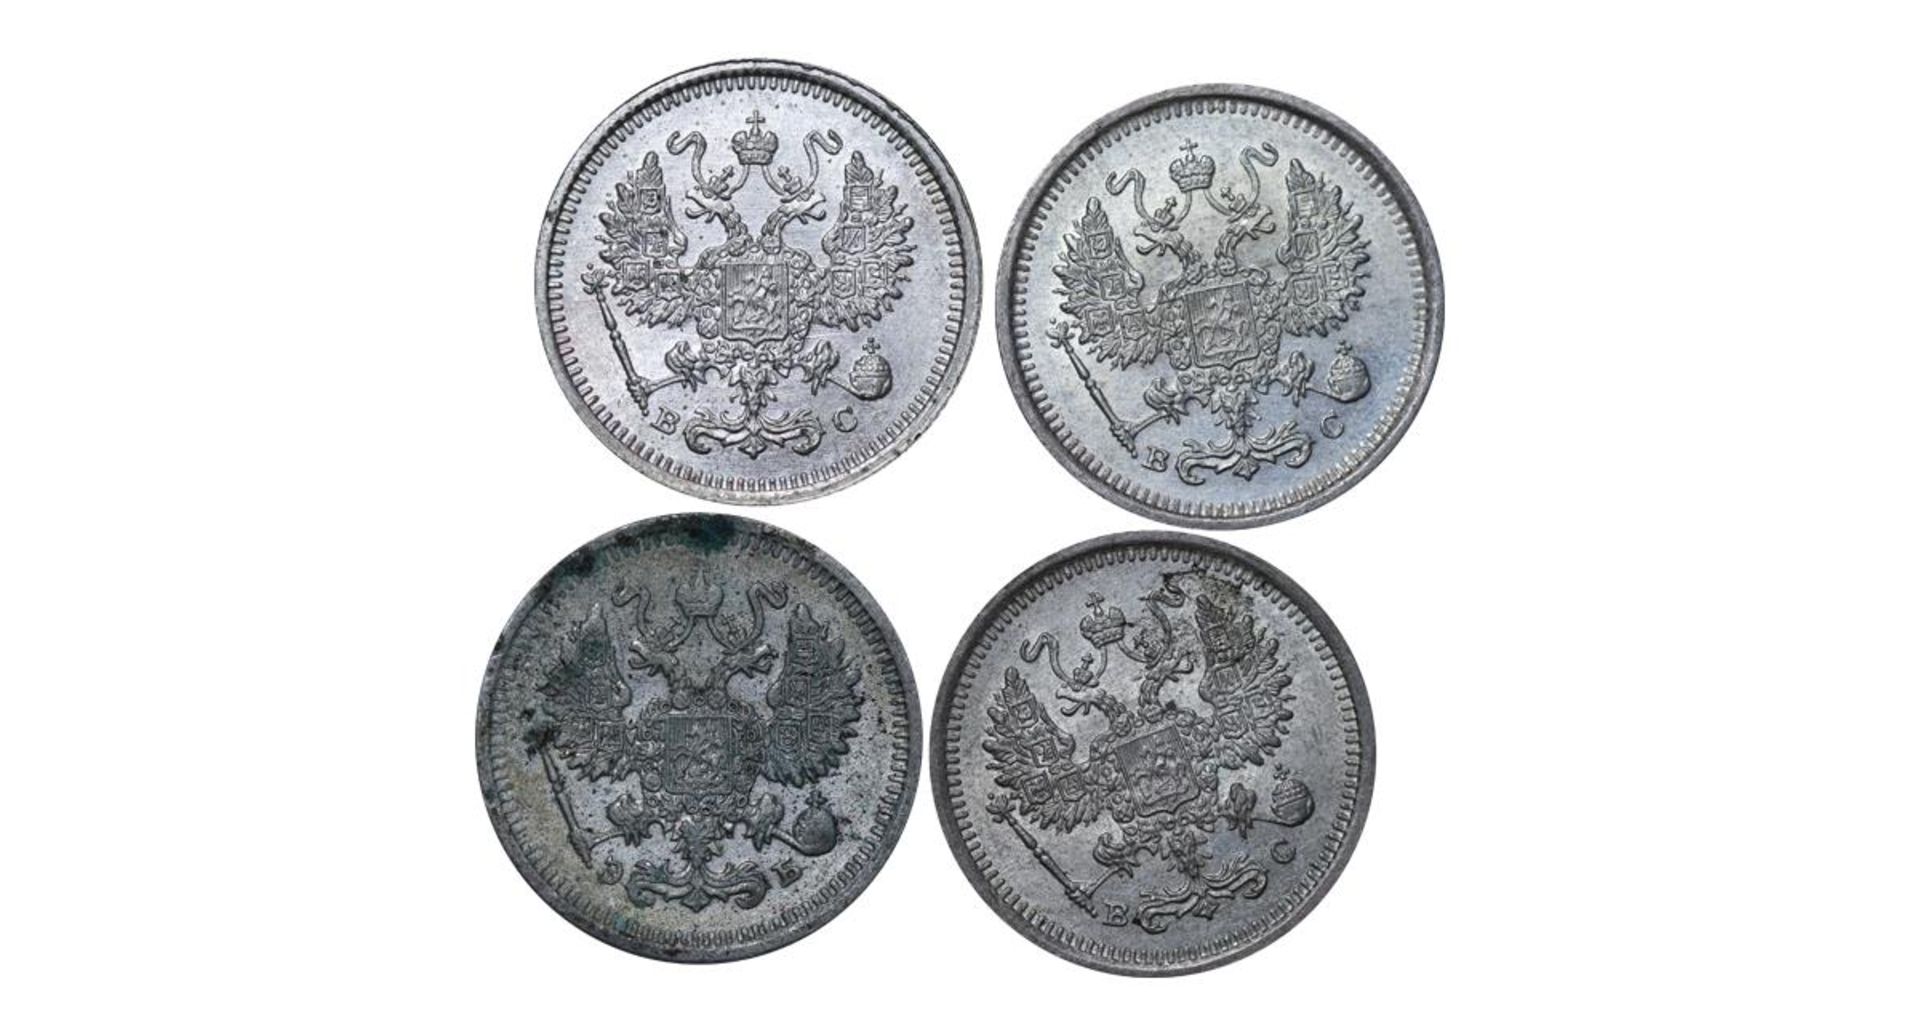 Collection of 4 coins: Russian Empire, 10 Kopecks, 1911 year, SPB-EB, 1916 year, EB, 1916 year, EB,  - Image 2 of 2